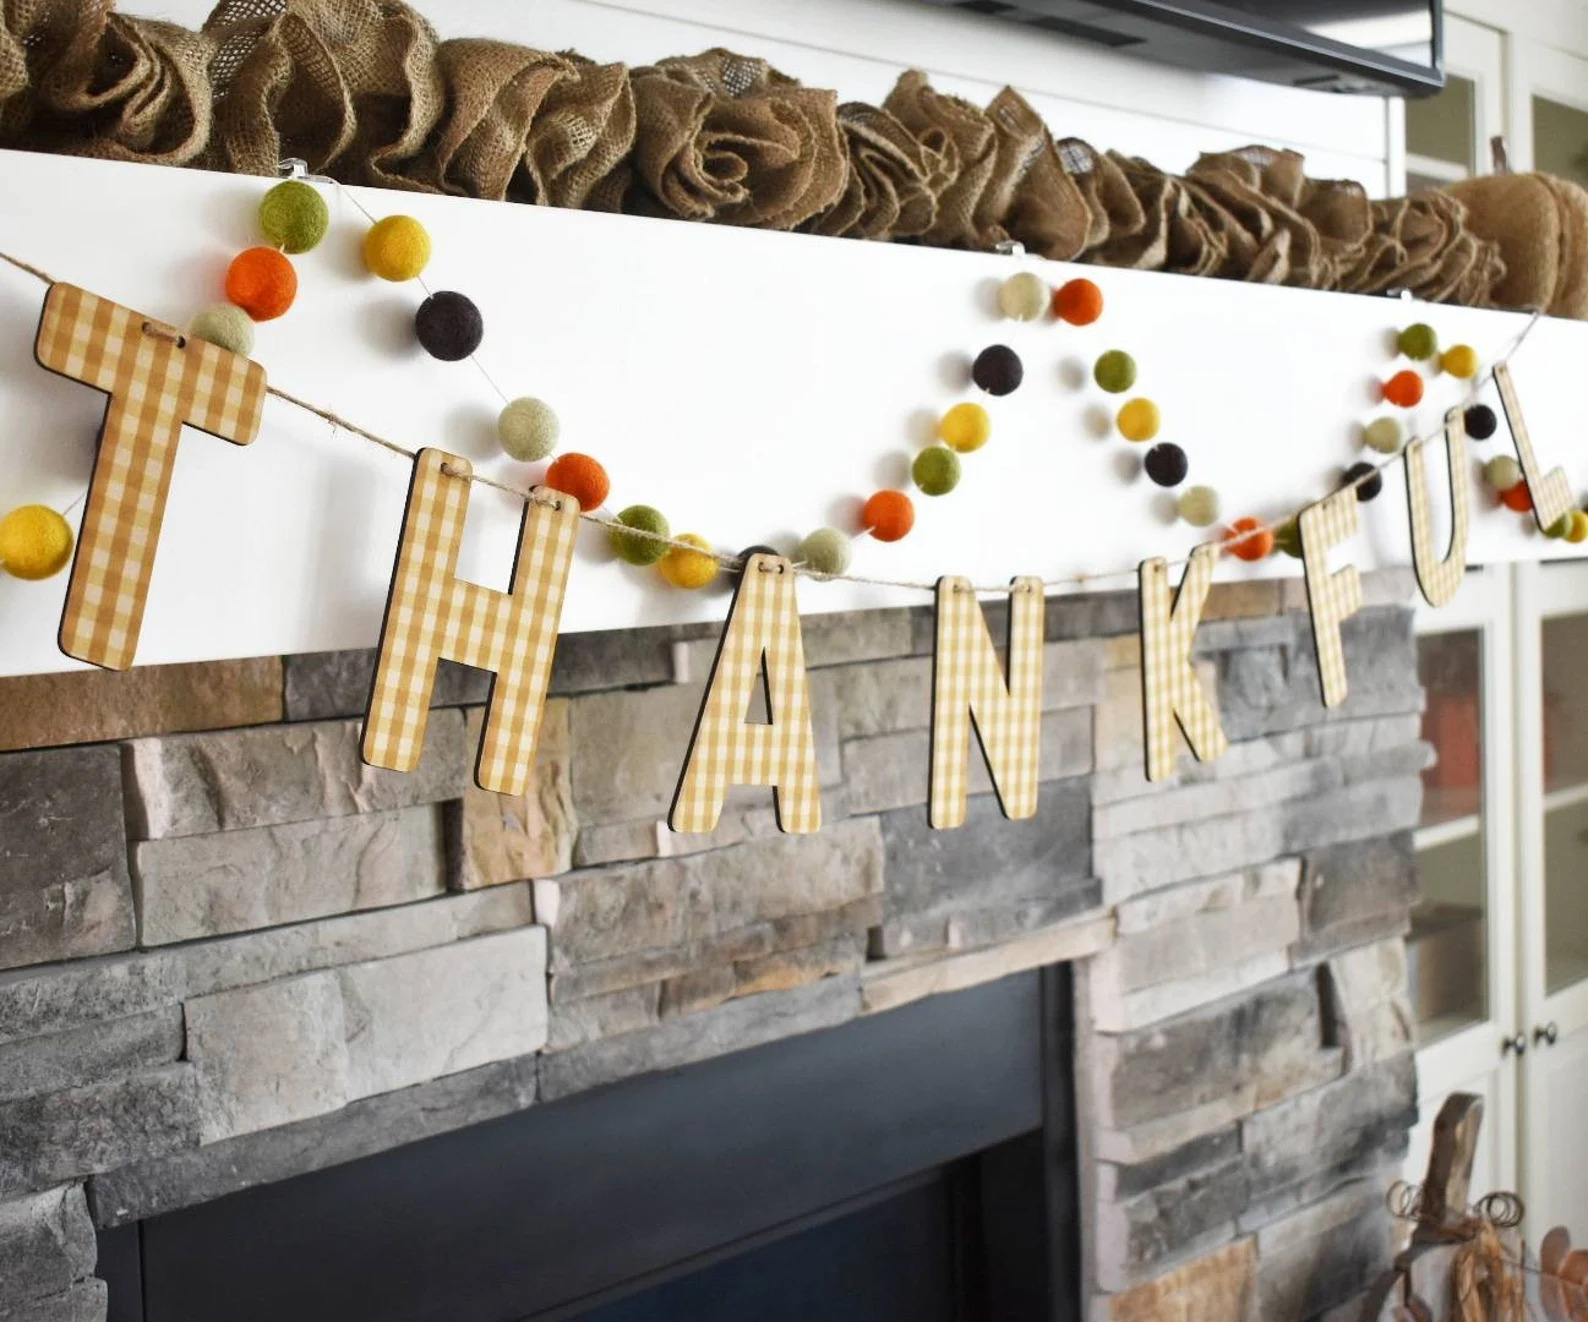 16 Heartwarming Thanksgiving Banner Designs You Must See